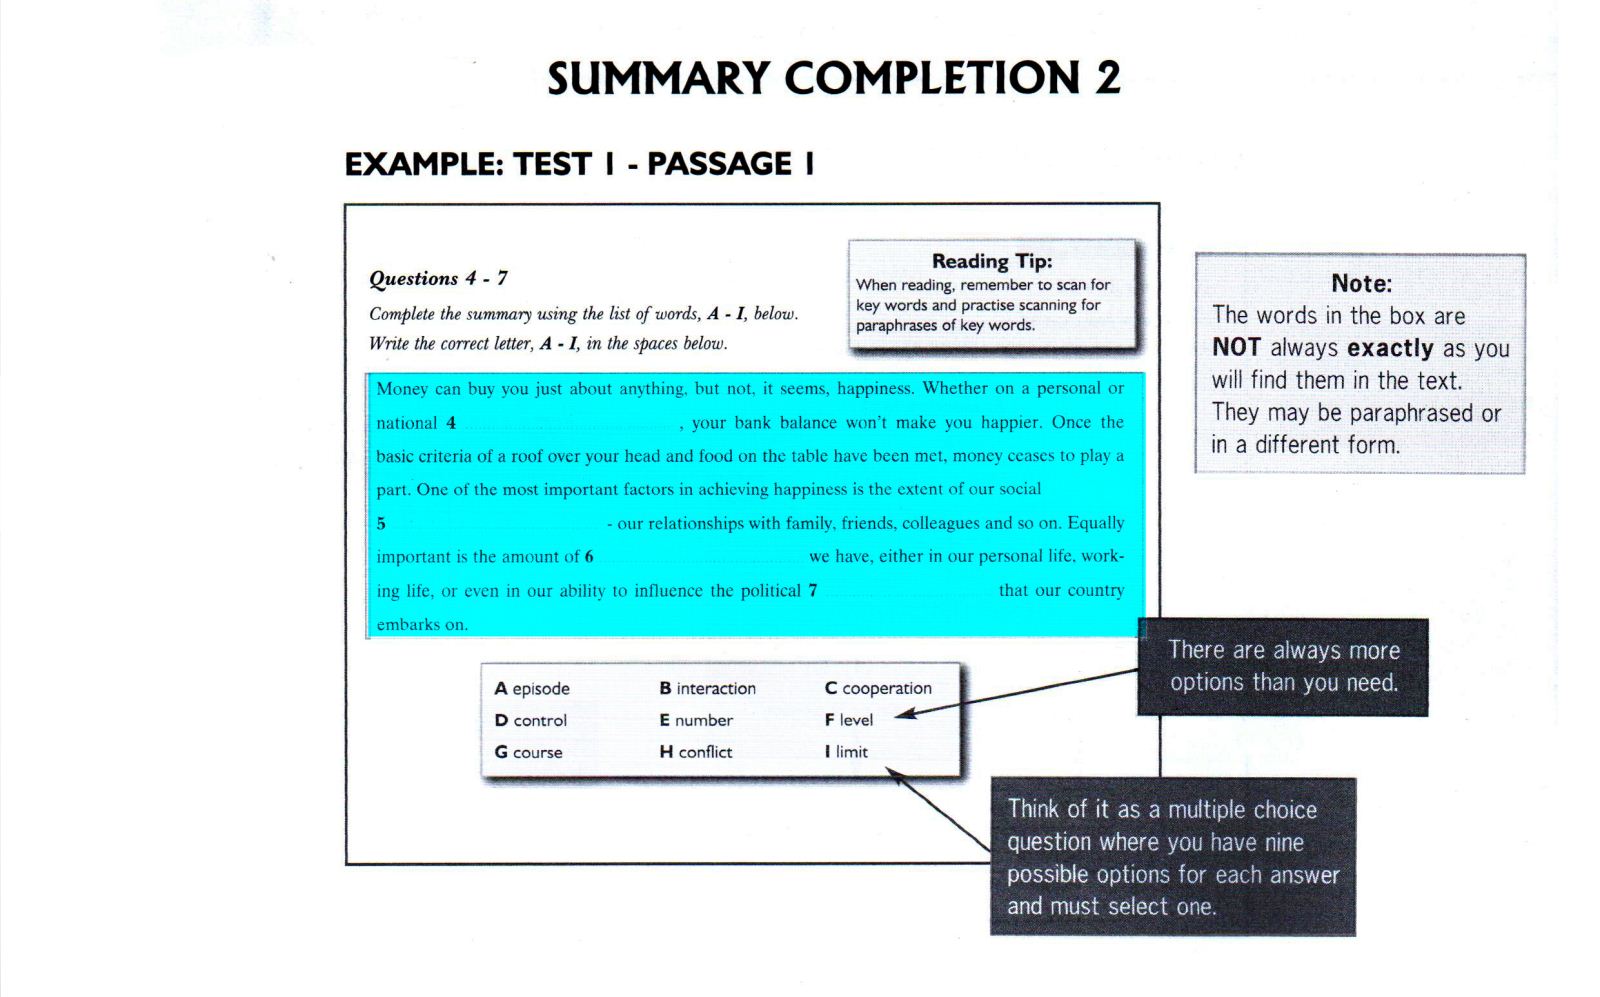 IELTS-Guide-Reading-9-summary-completion-2